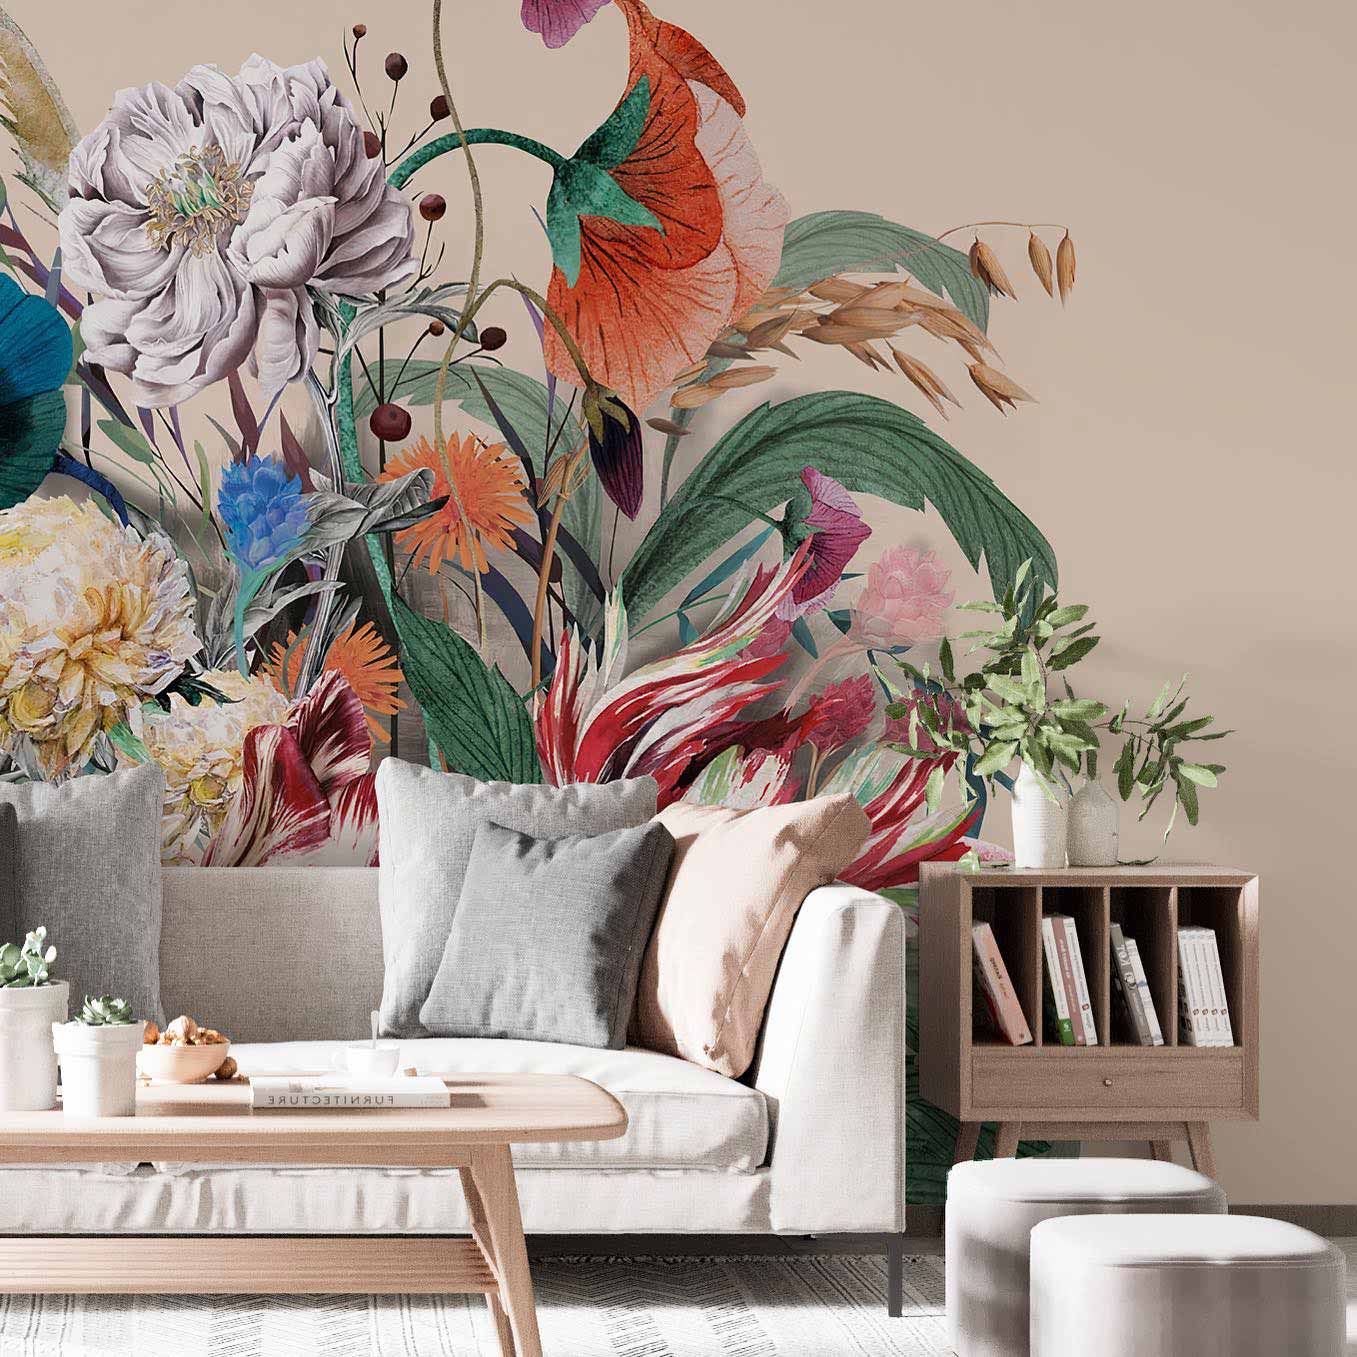 Living room with a light sofa, wooden furniture, and floral wall mural